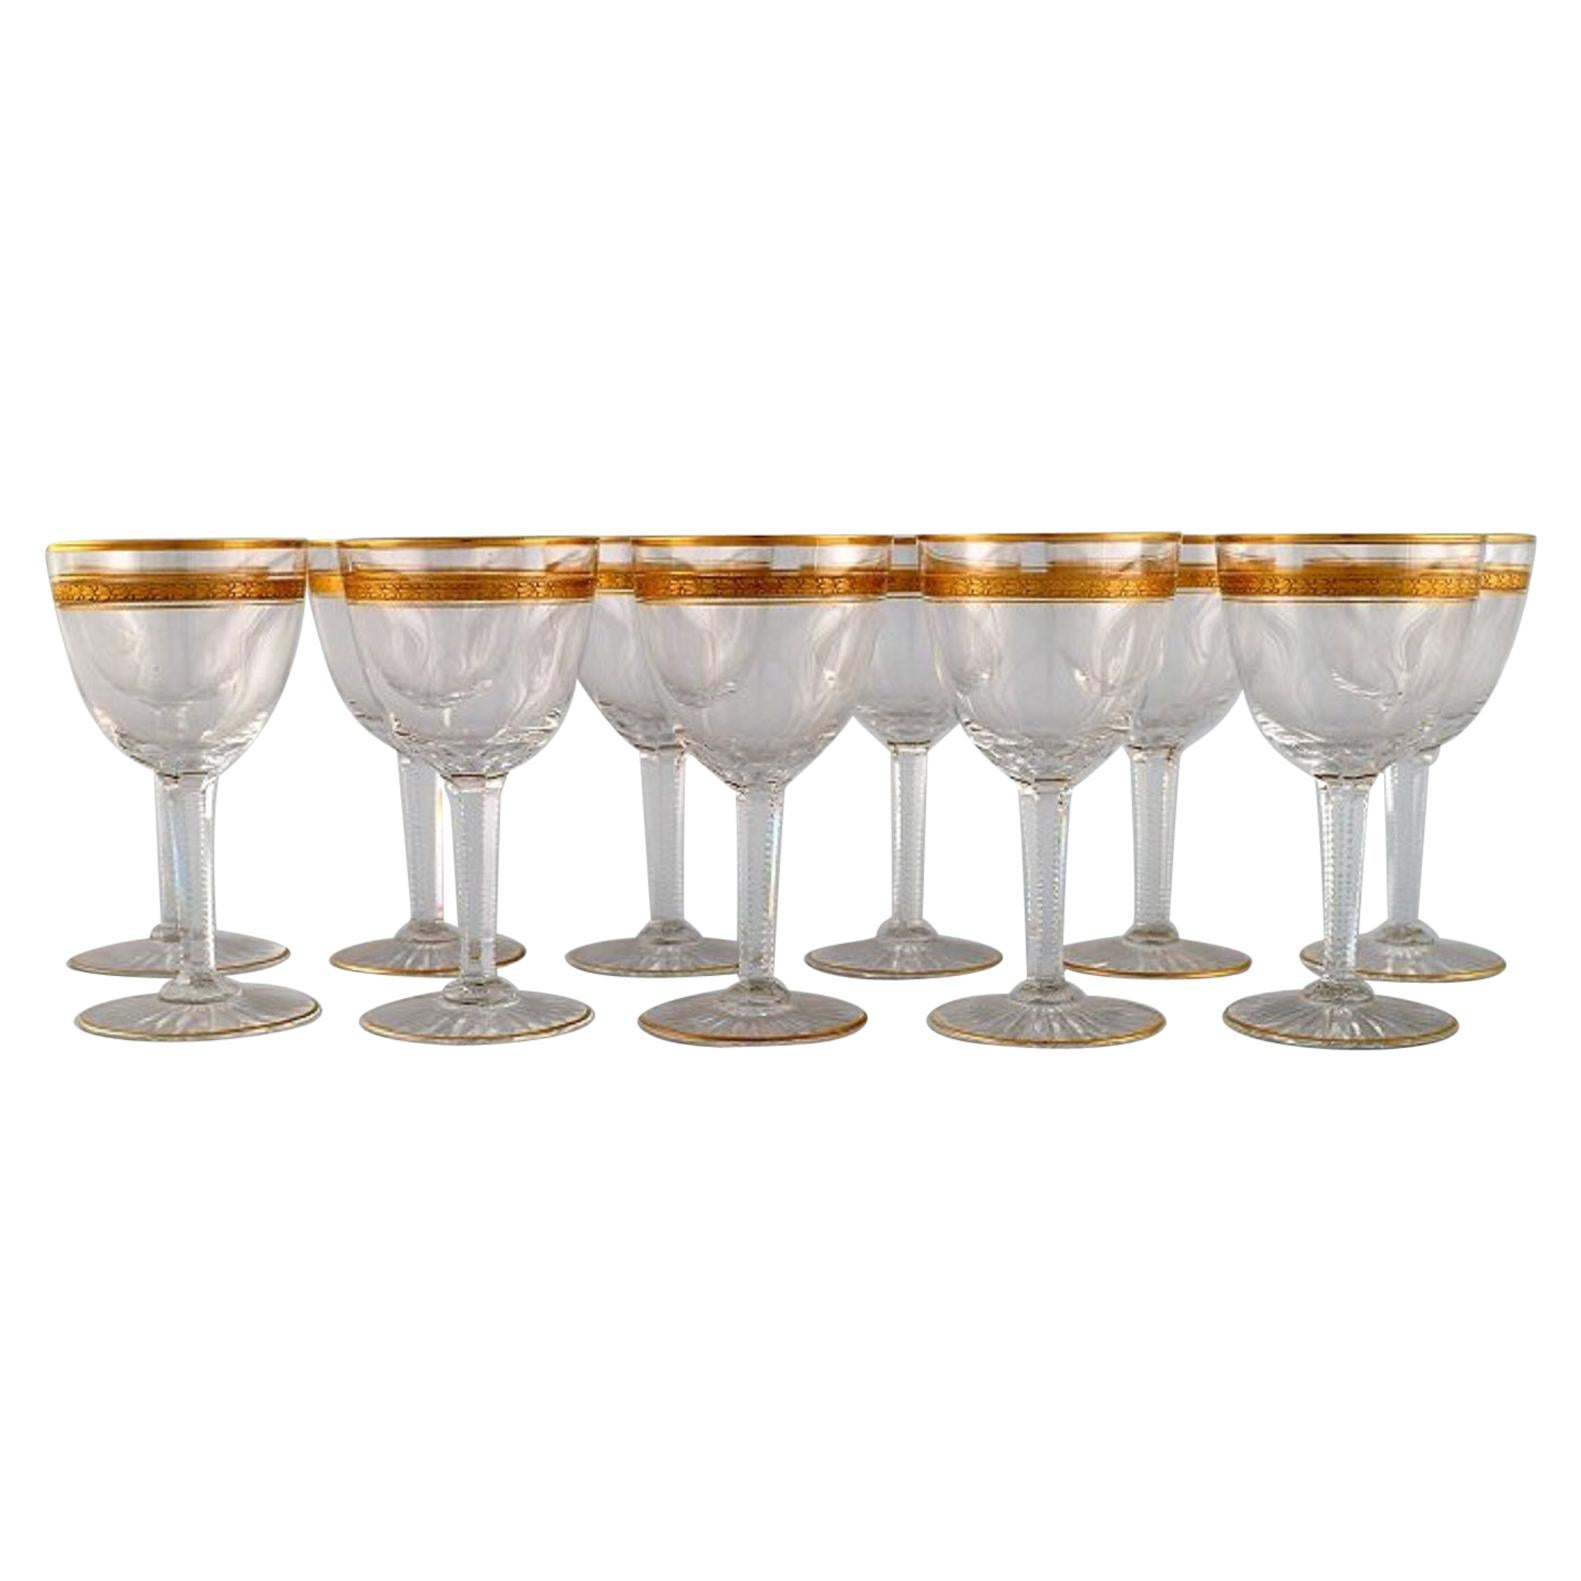 Baccarat, France, Eleven Art Deco White Wine Glasses in Crystal Glass, 1930's